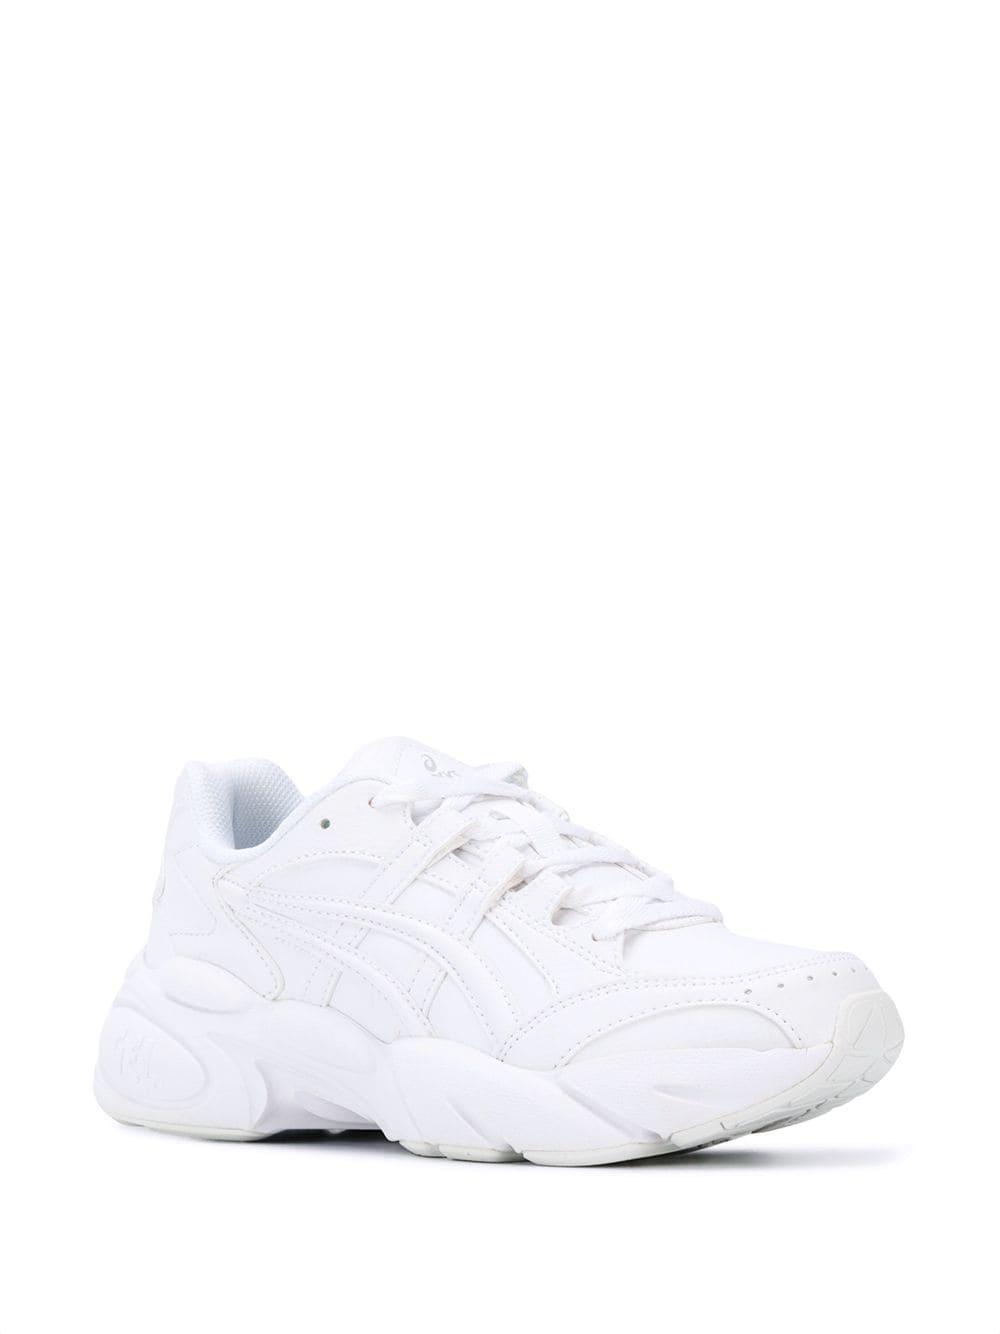 asics chunky sneakers